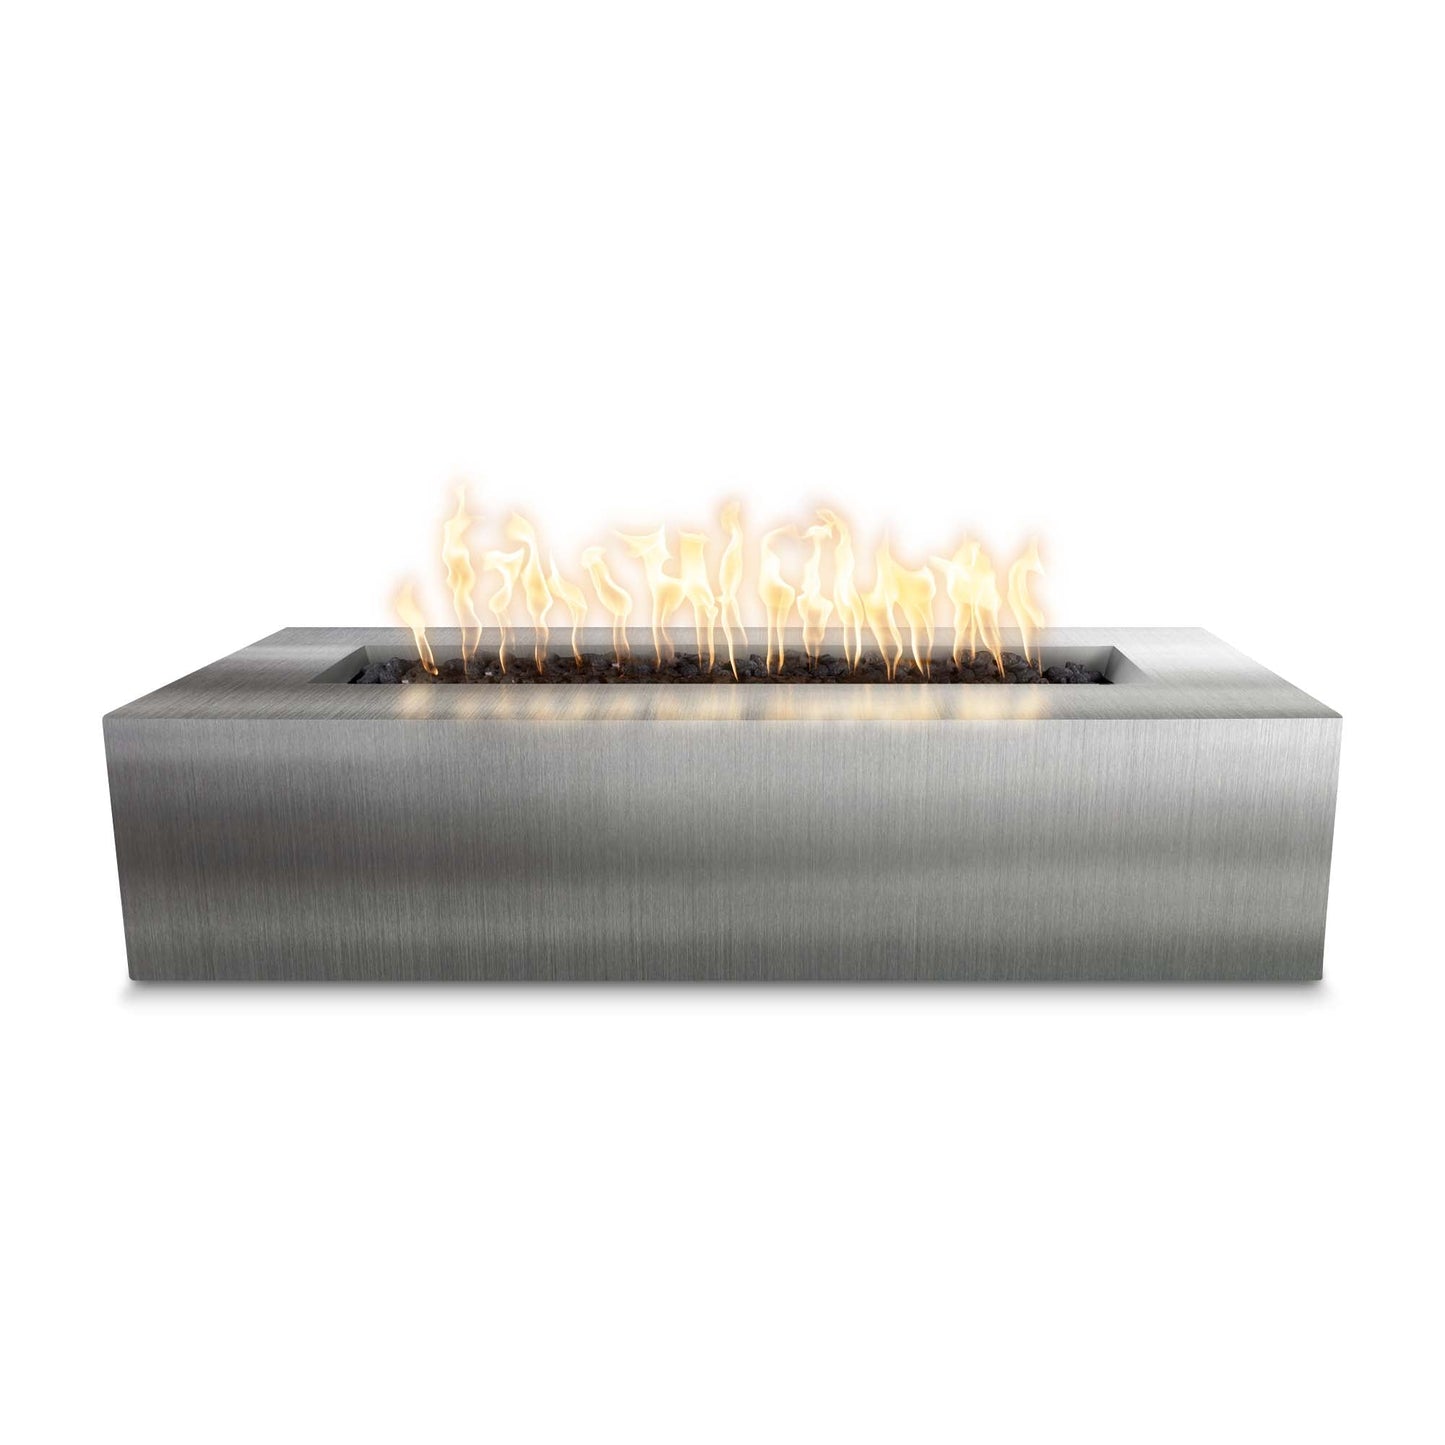 The Outdoor Plus Rectangular Regal 48" Stainless Steel Liquid Propane Fire Pit with Match Lit Ignition